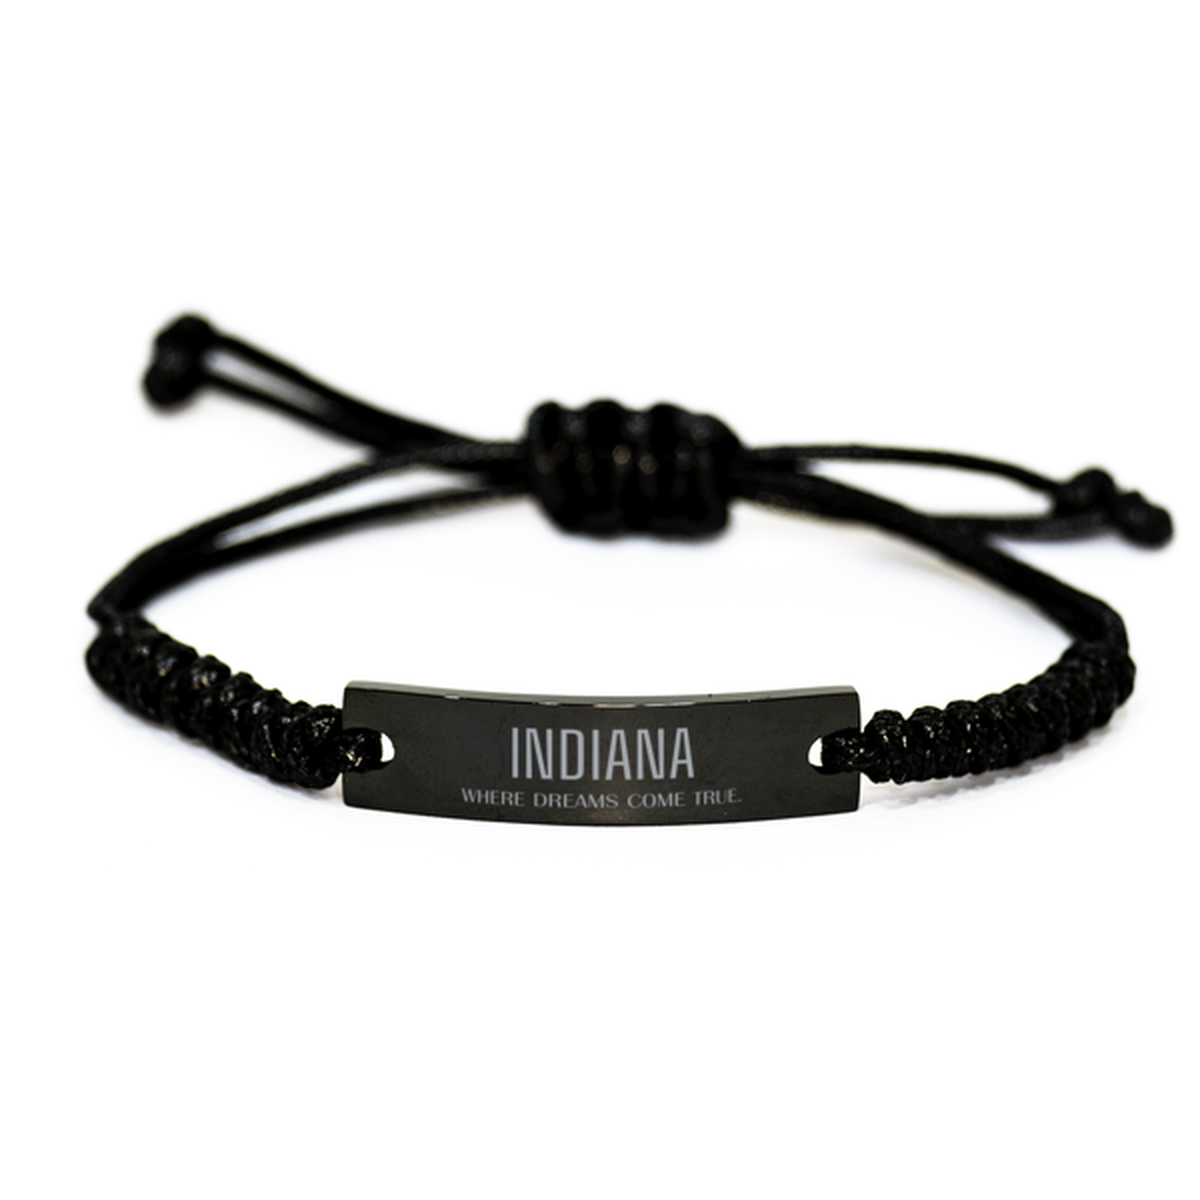 Love Indiana State Black Rope Bracelet, Indiana Where dreams come true, Birthday Inspirational Gifts For Indiana Men, Women, Friends